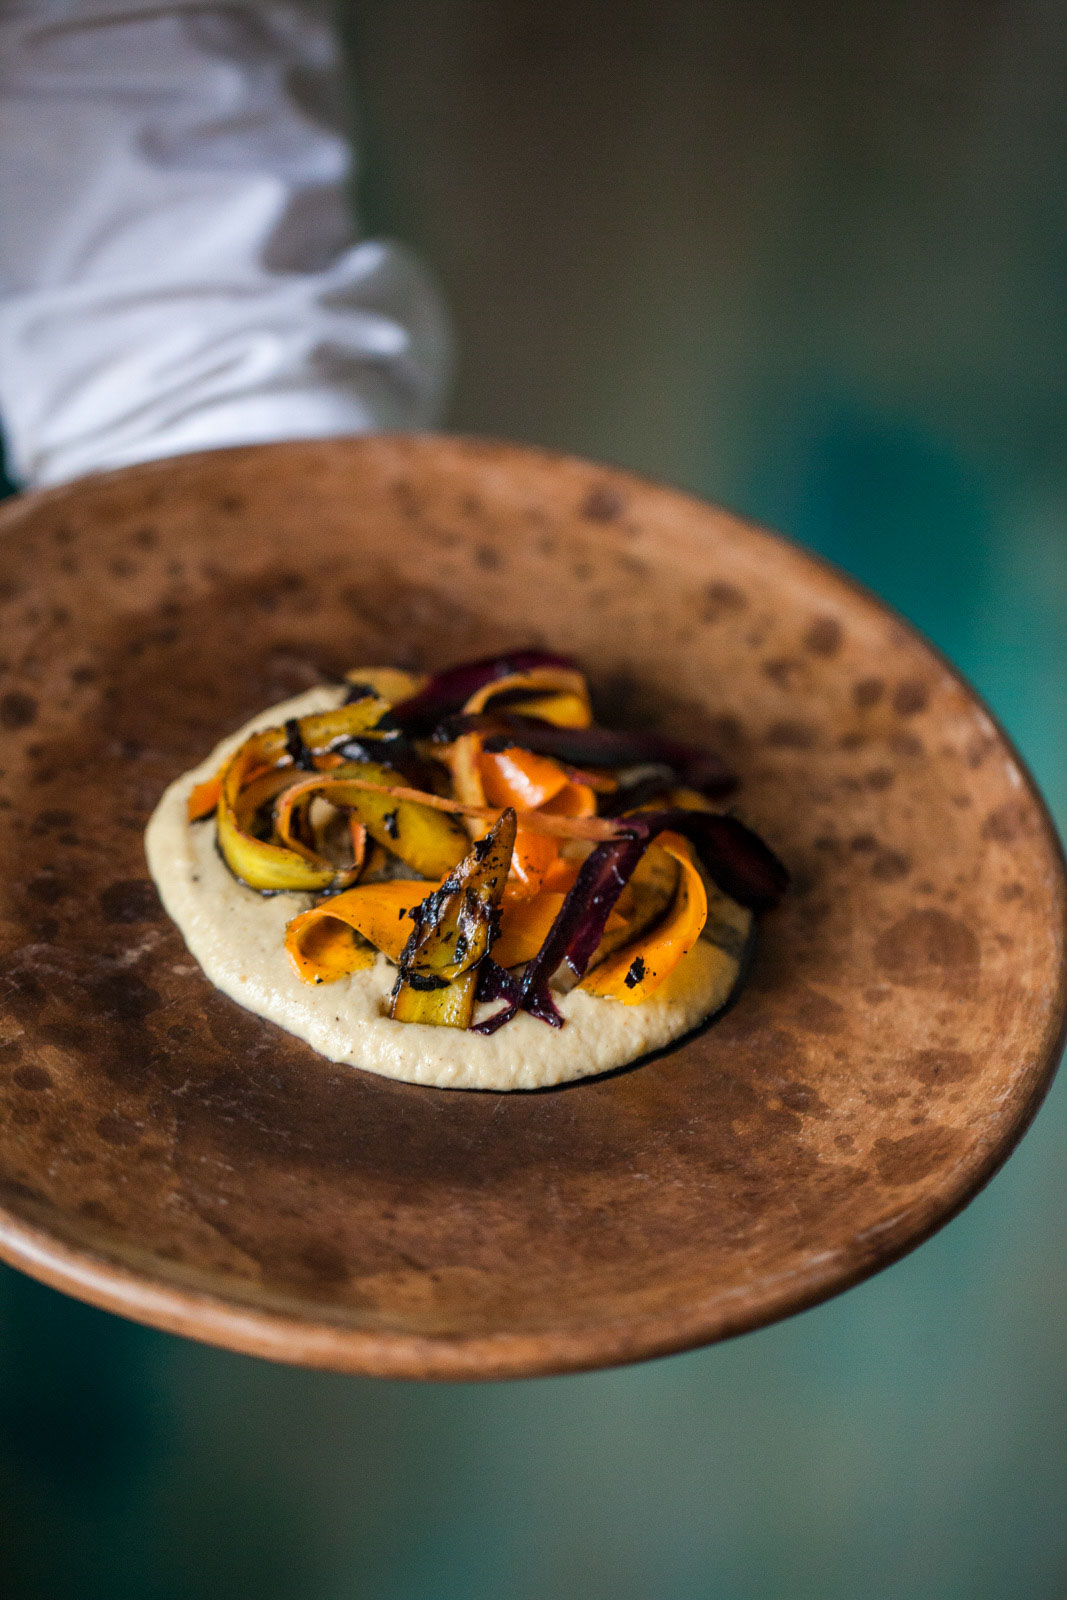 A blend of Mexican and Italian cuisine at Rosetta